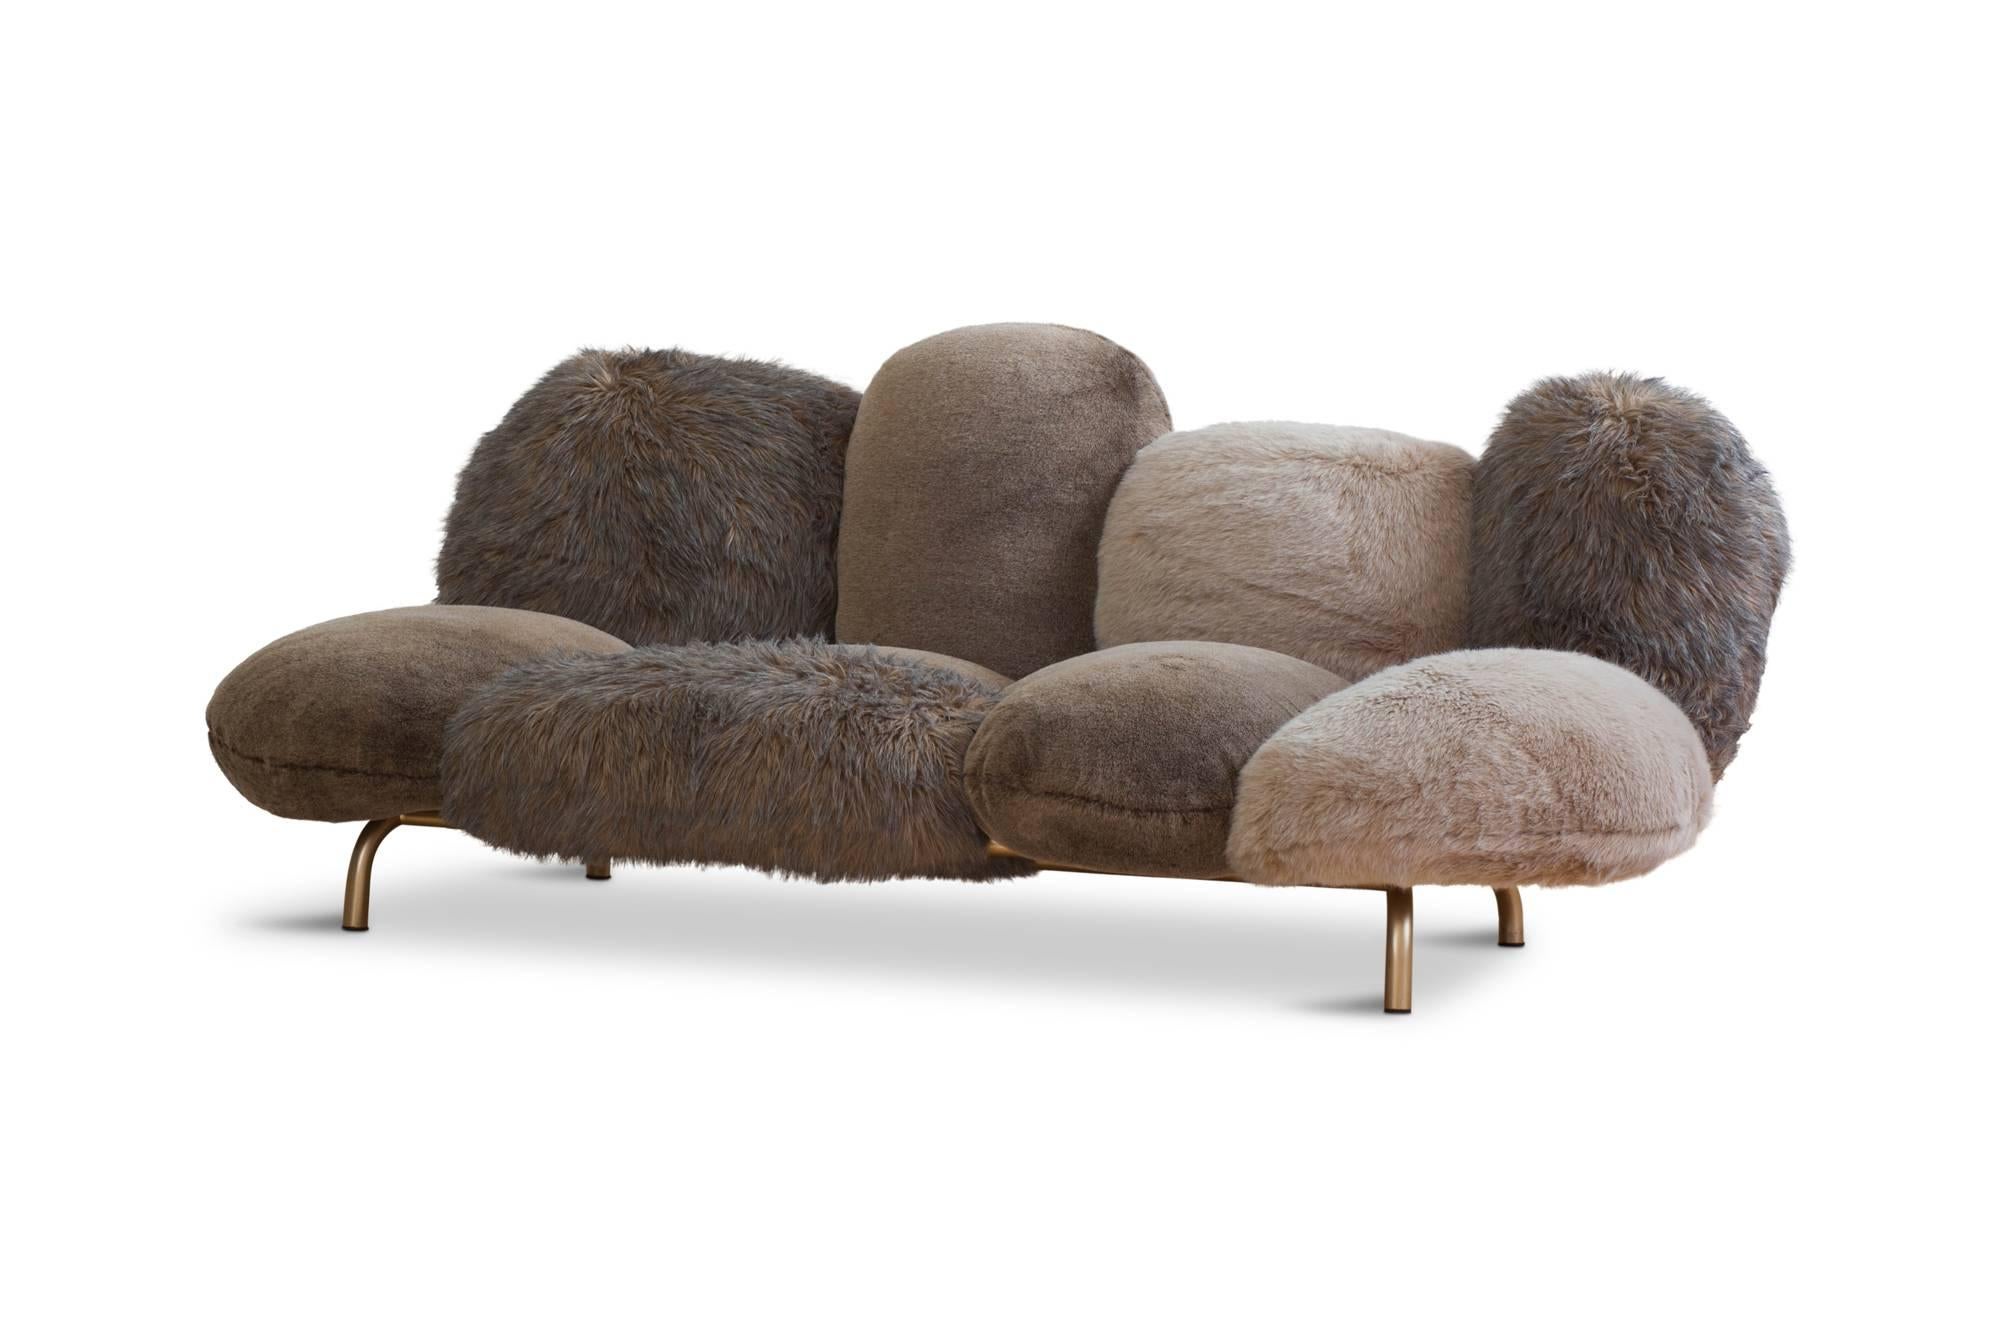 Nine pillows reminiscent of powder puffs attached to an invisible structure of tubular metal.
A contemporary sofa that provides multiple possibilities for seating—both formal and informal.
Frame in lacquered steel tube and poplar plywood. Padding